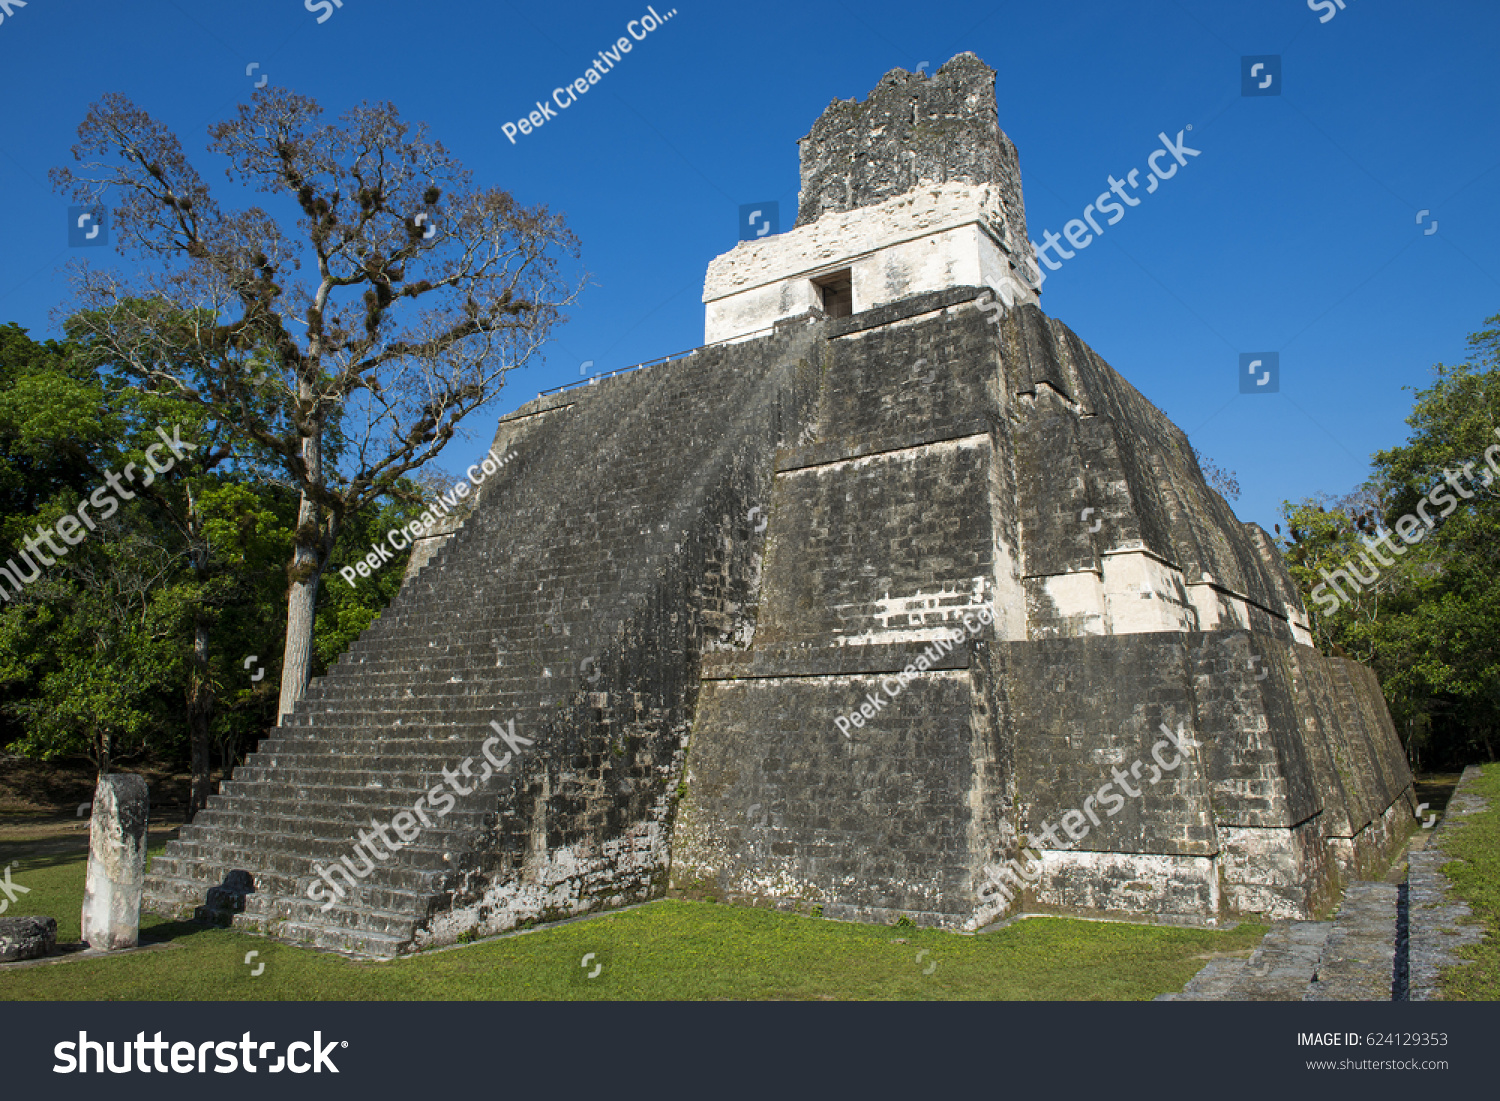 The ancient mayan culture